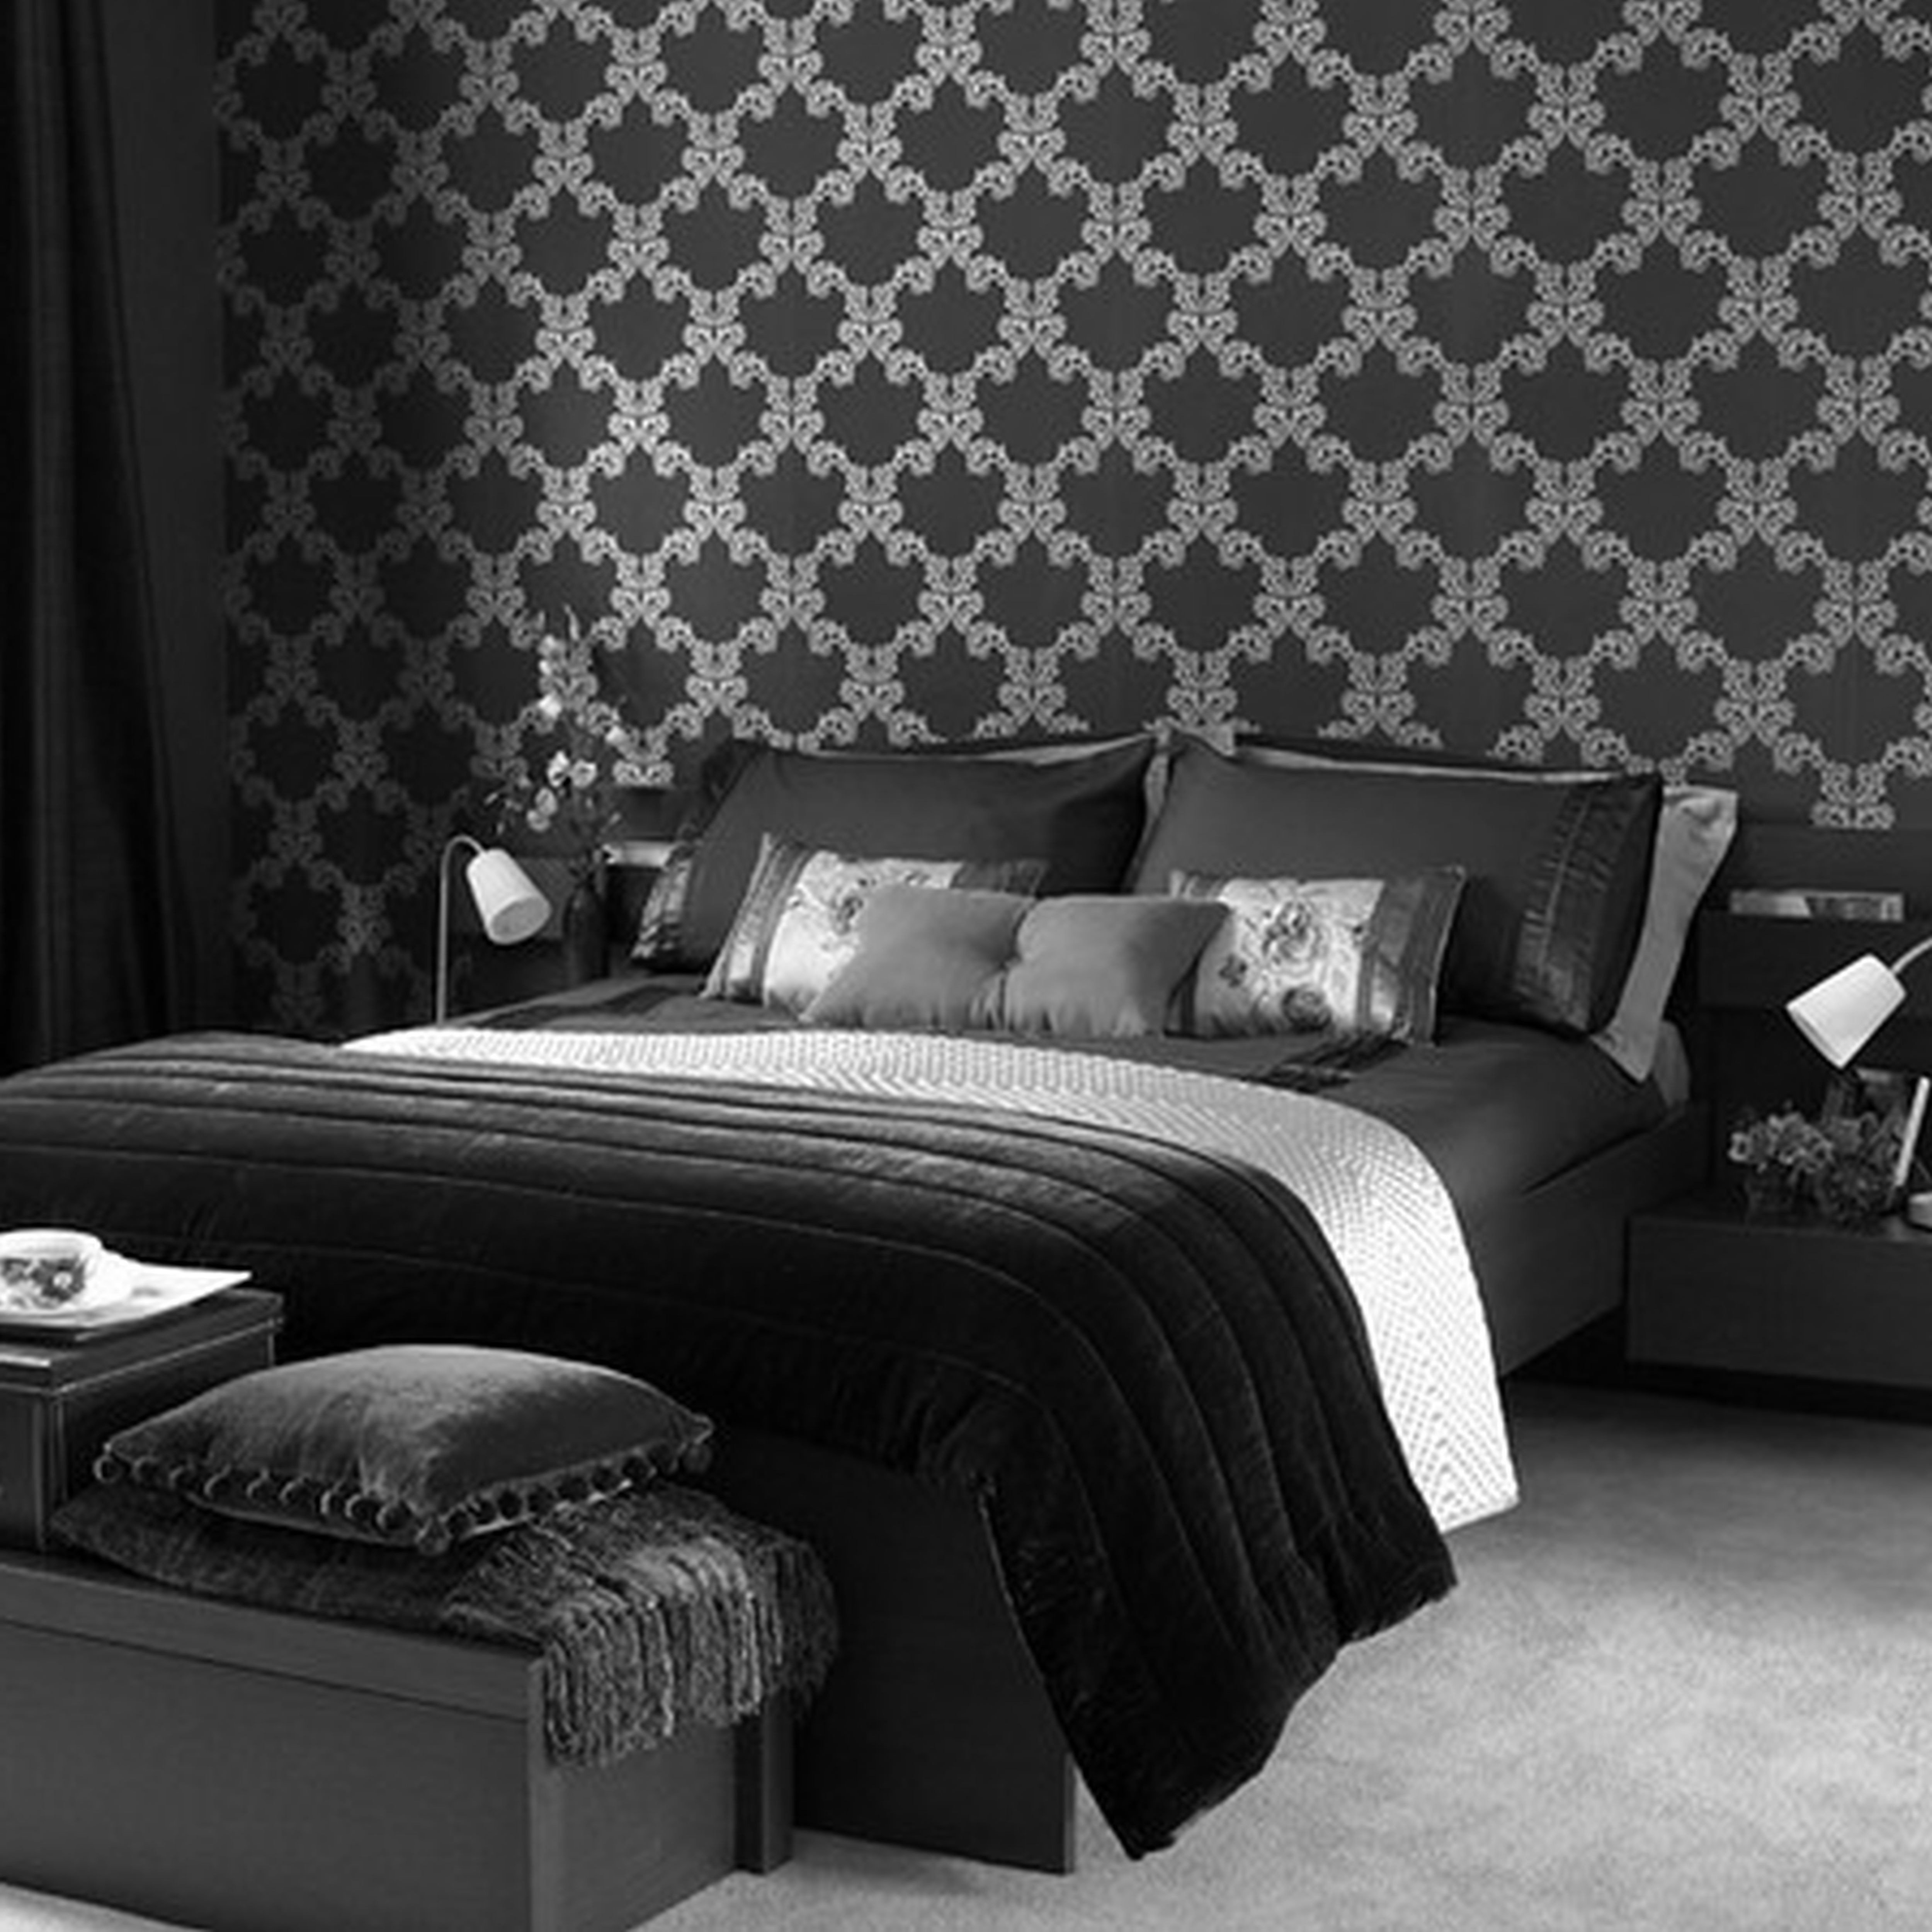 Grey and Turquoise Bedroom Ideas Lovely Black and White Bedroom Wallpaper Design New Blog